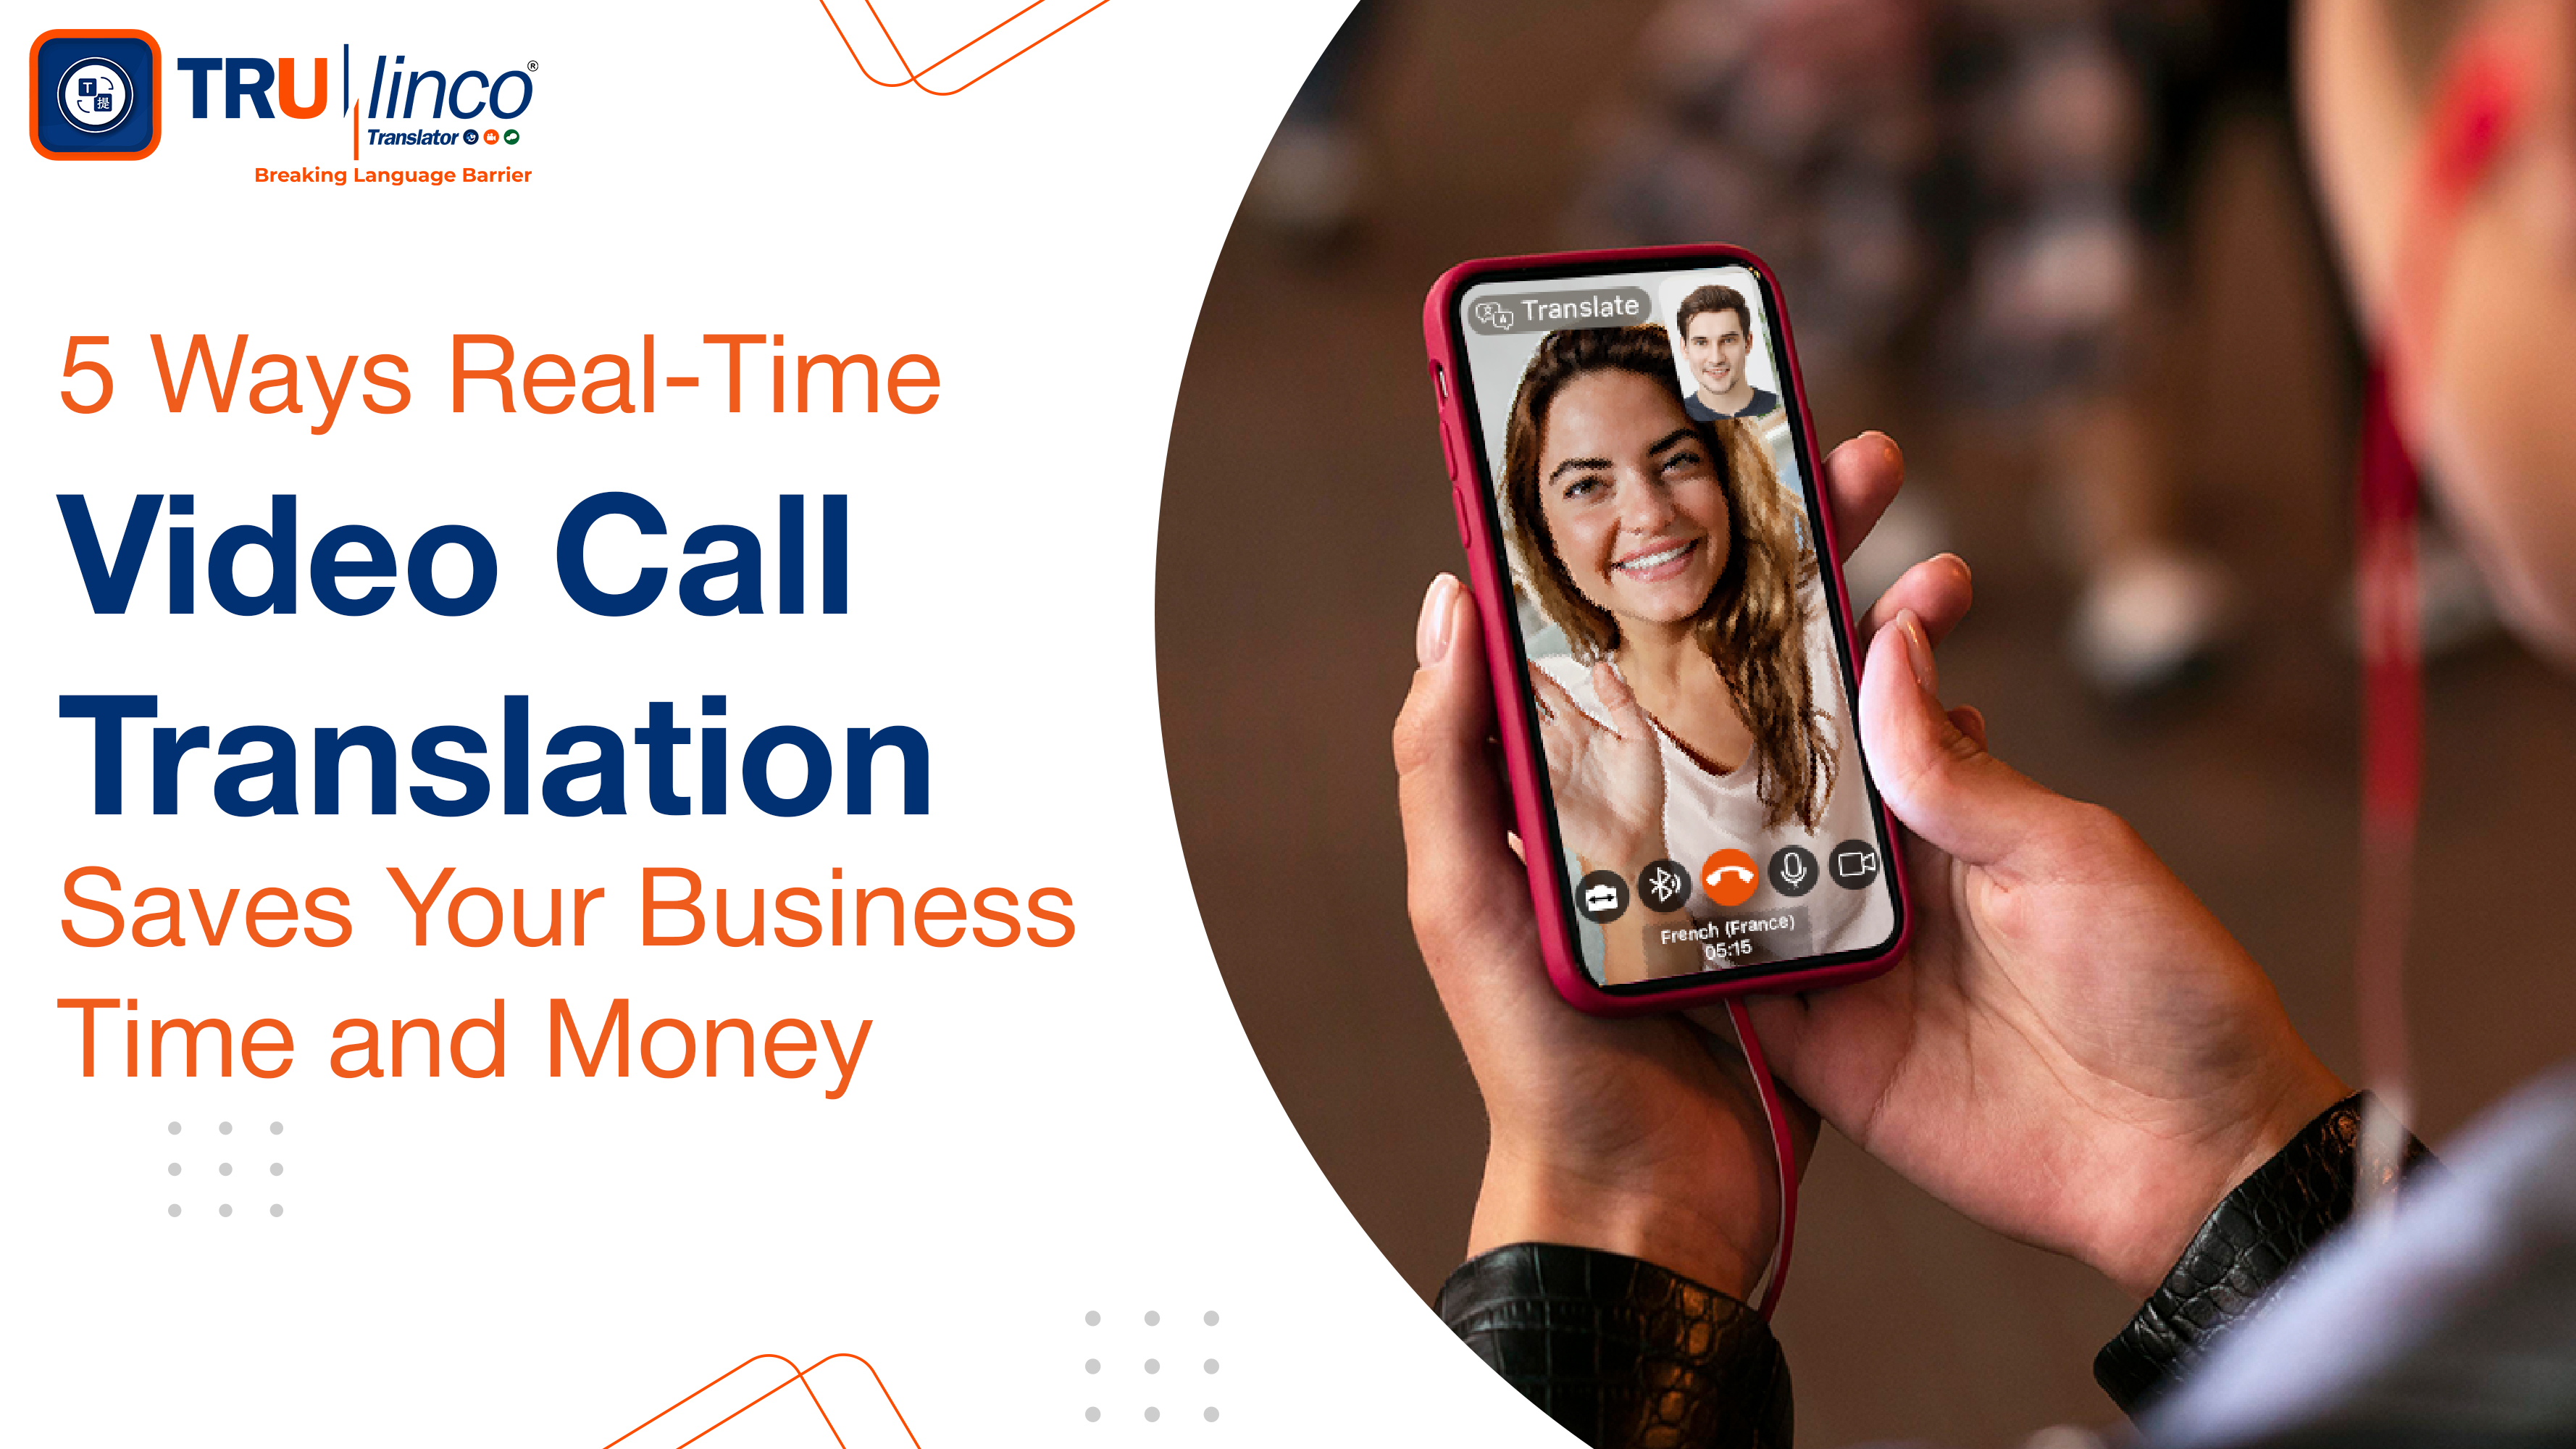 5 Ways Real-Time Video Call Translation Saves Your Business Time and Money